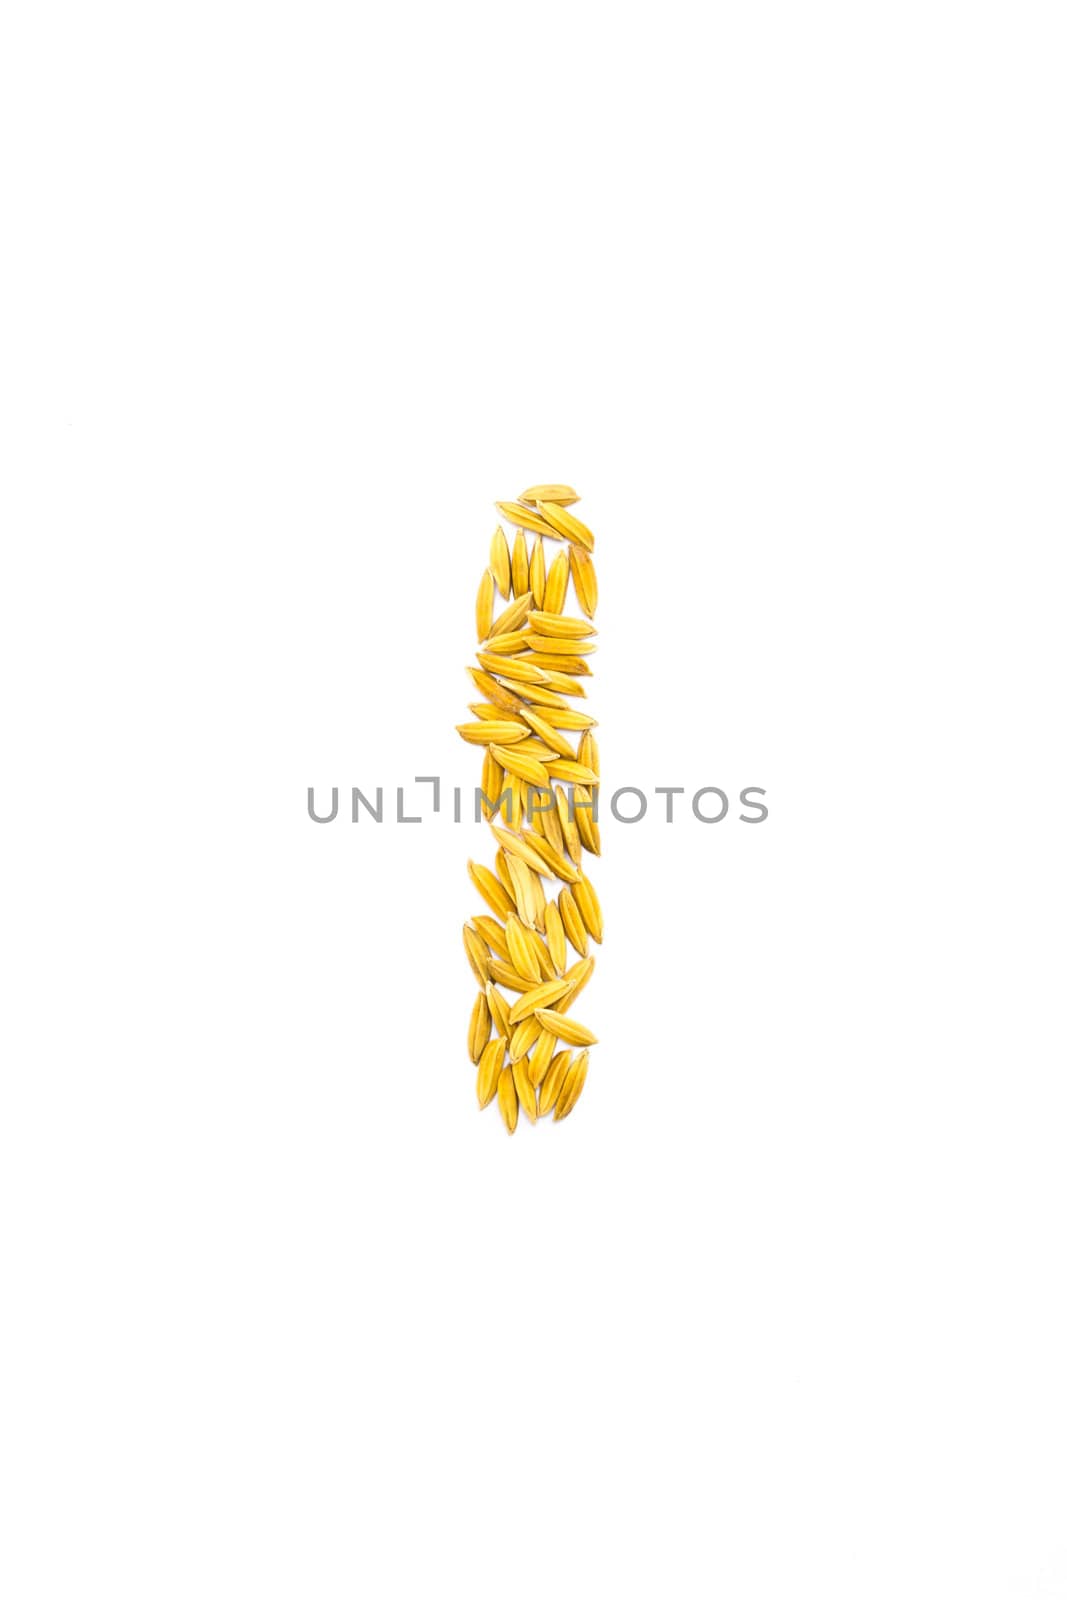 I letter of rice on a white background